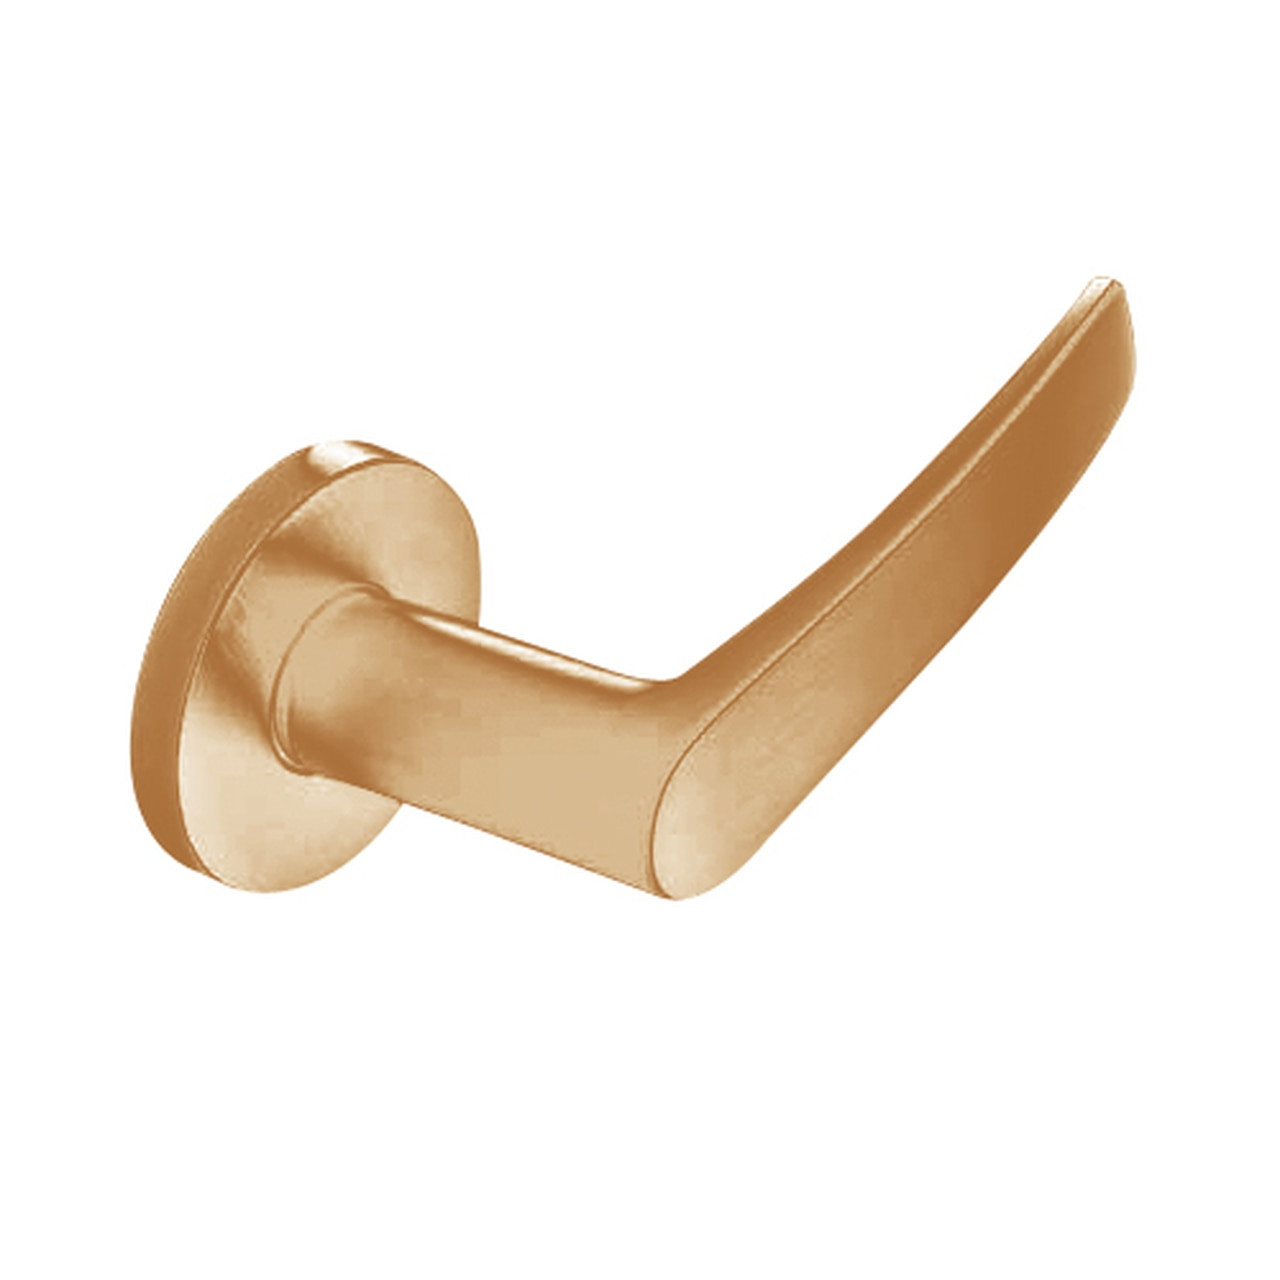 ML2057-ASB-612-M31 Corbin Russwin ML2000 Series Mortise Storeroom Trim Pack with Armstrong Lever in Satin Bronze